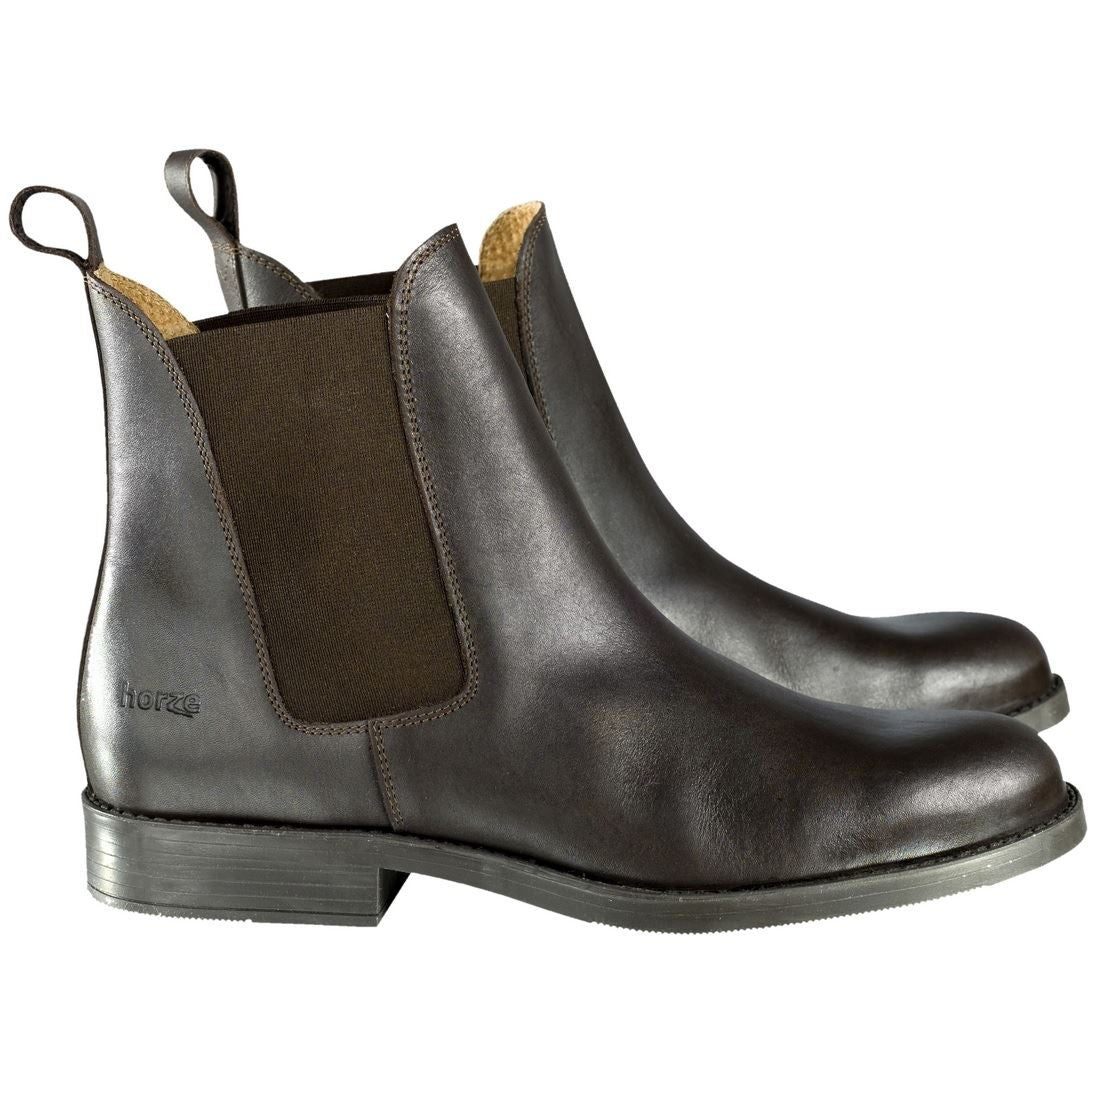 Classic Leather Jodphur Brown Boots